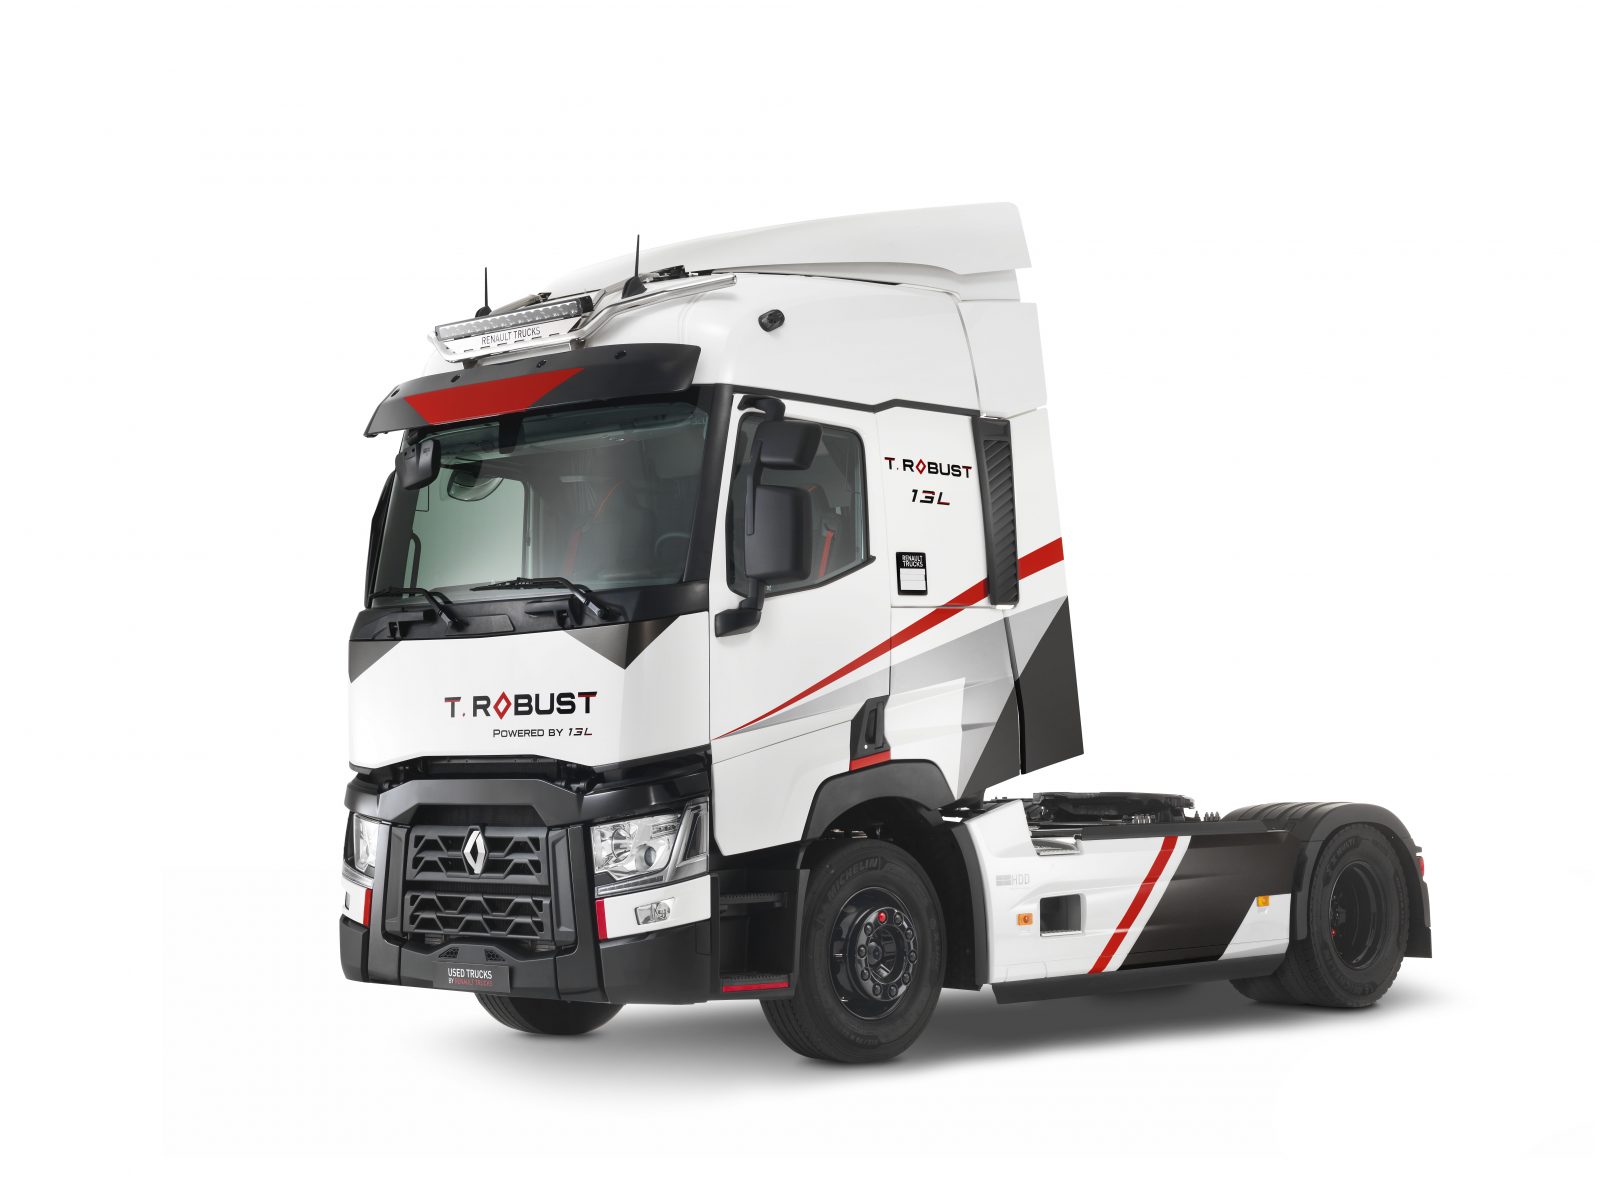 Renault Trucks T Robust special edition_03